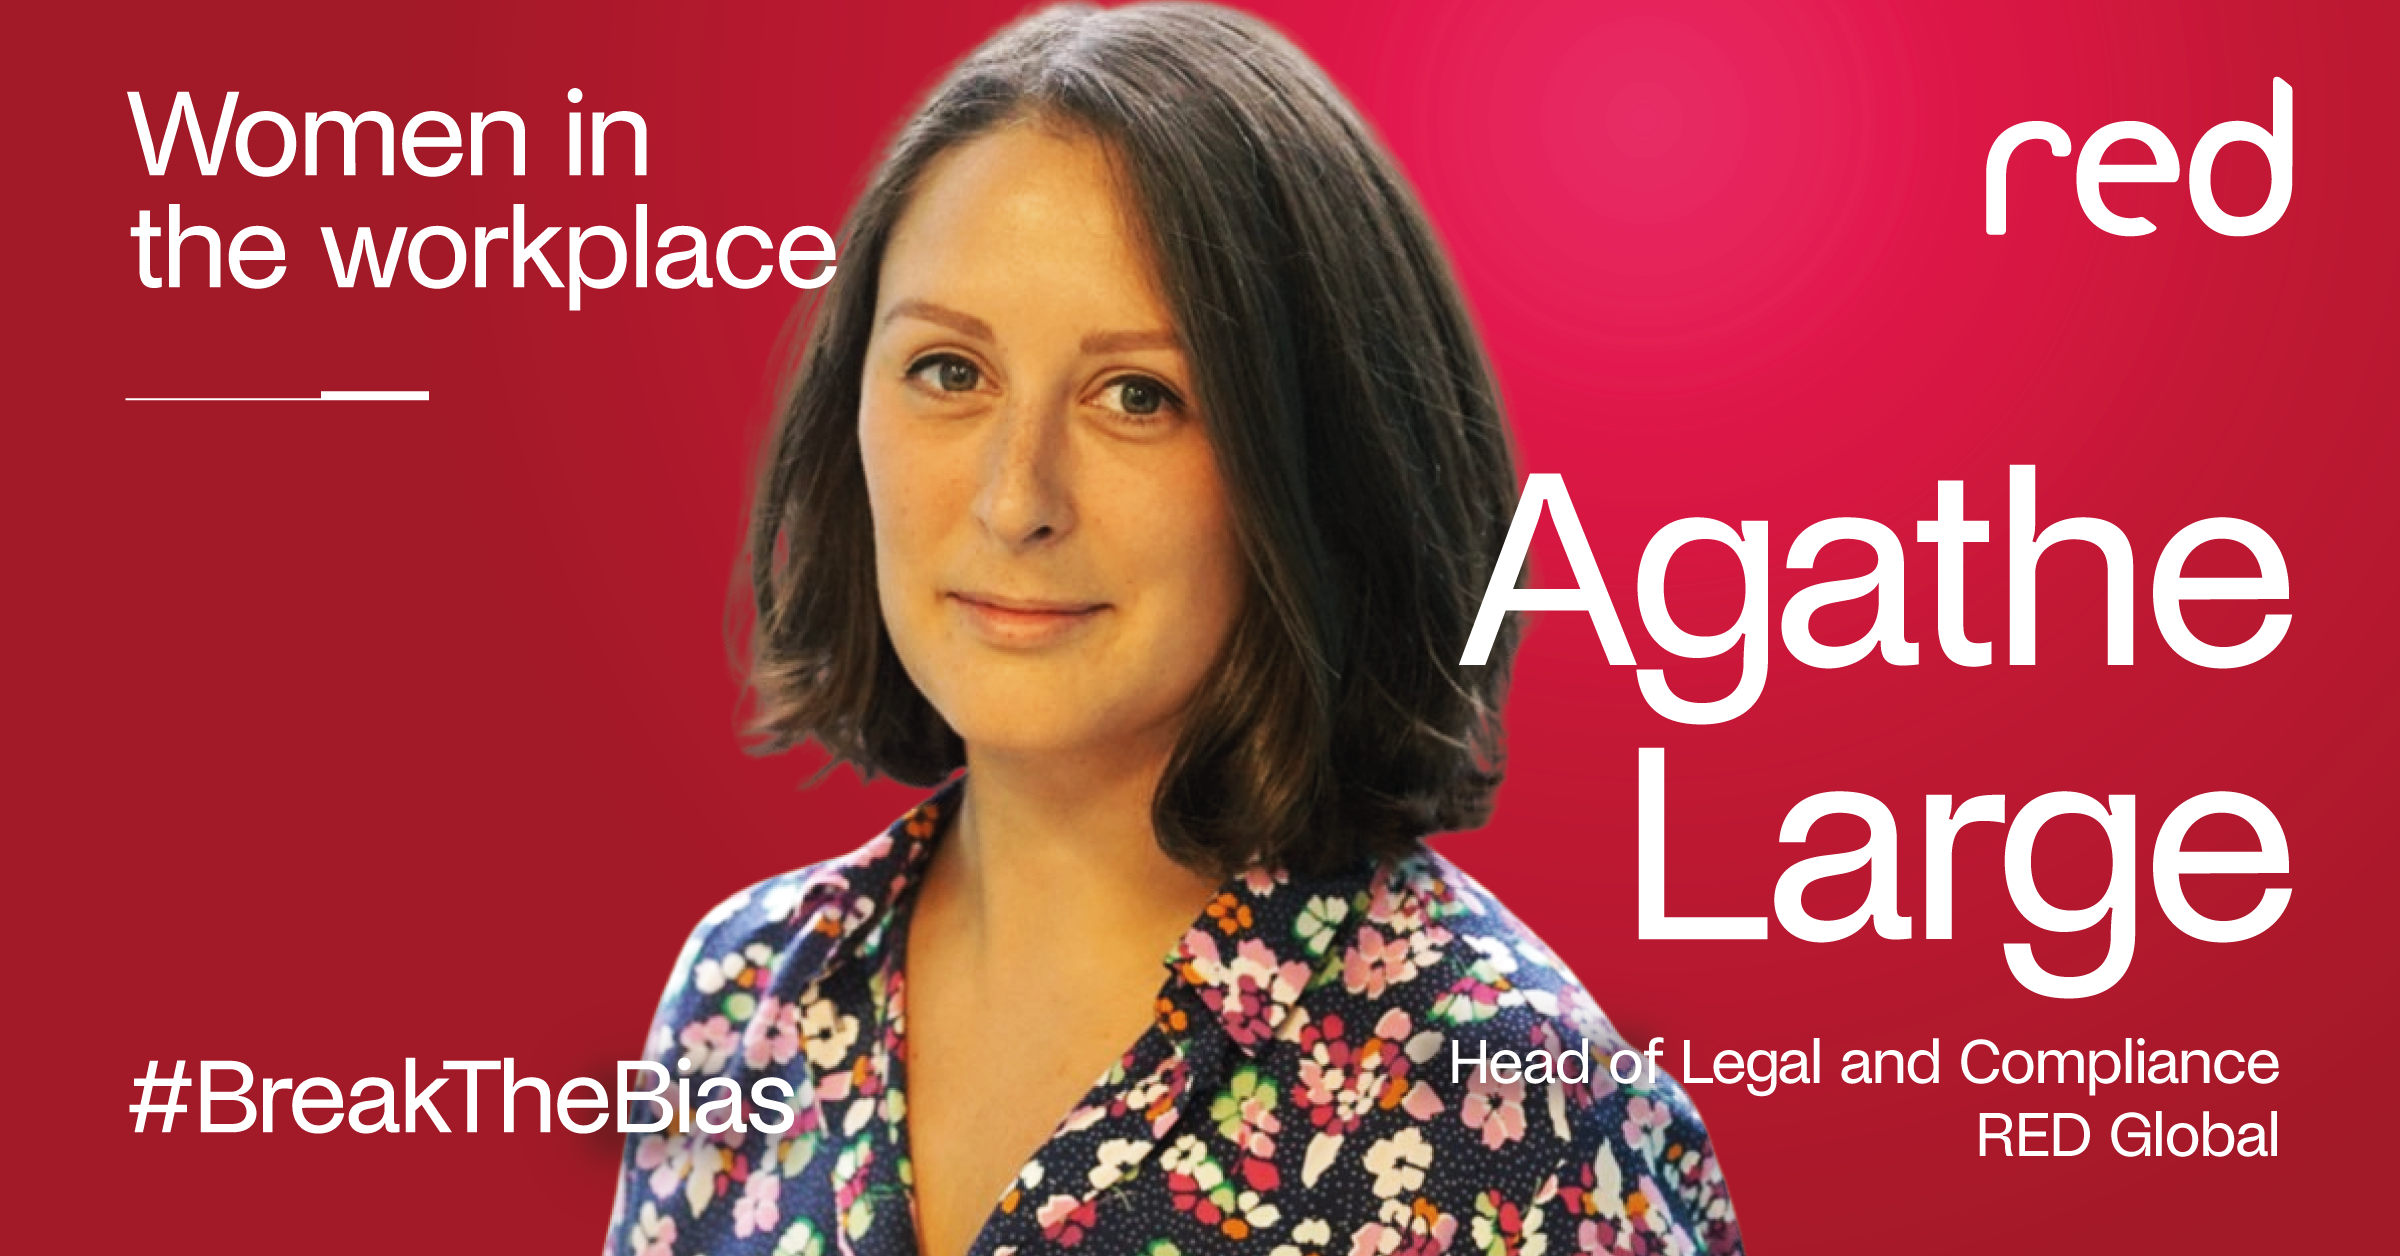 RED Global Q&A session with Agathe Large for Women in the workplace